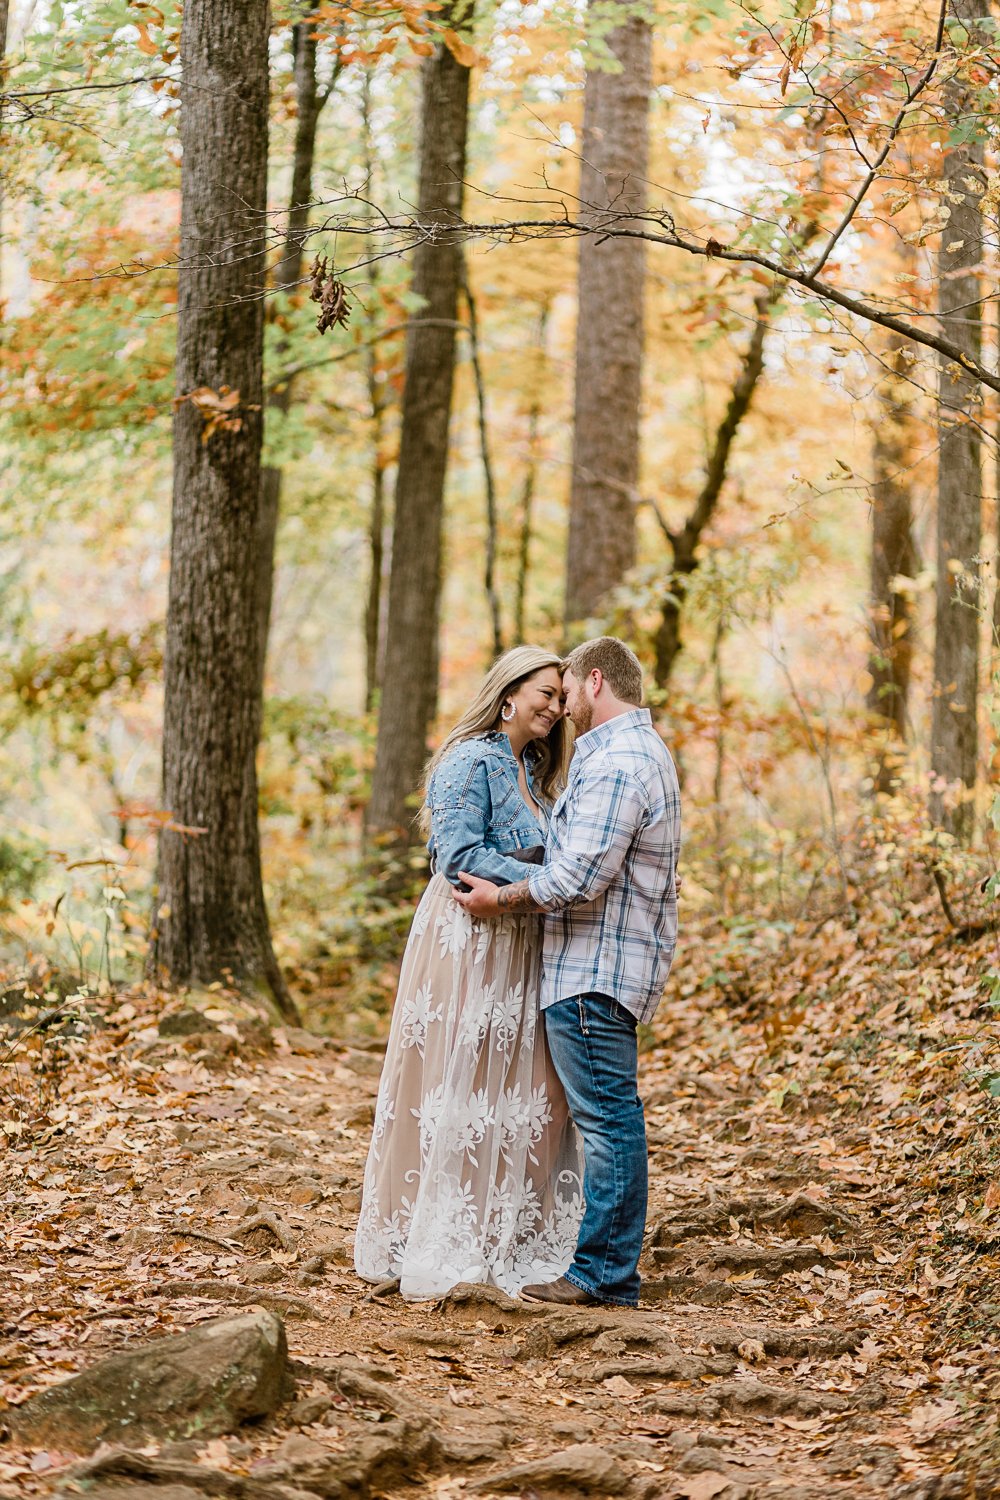 5 of the best places to take engagment photos in greenville sc-12.jpg